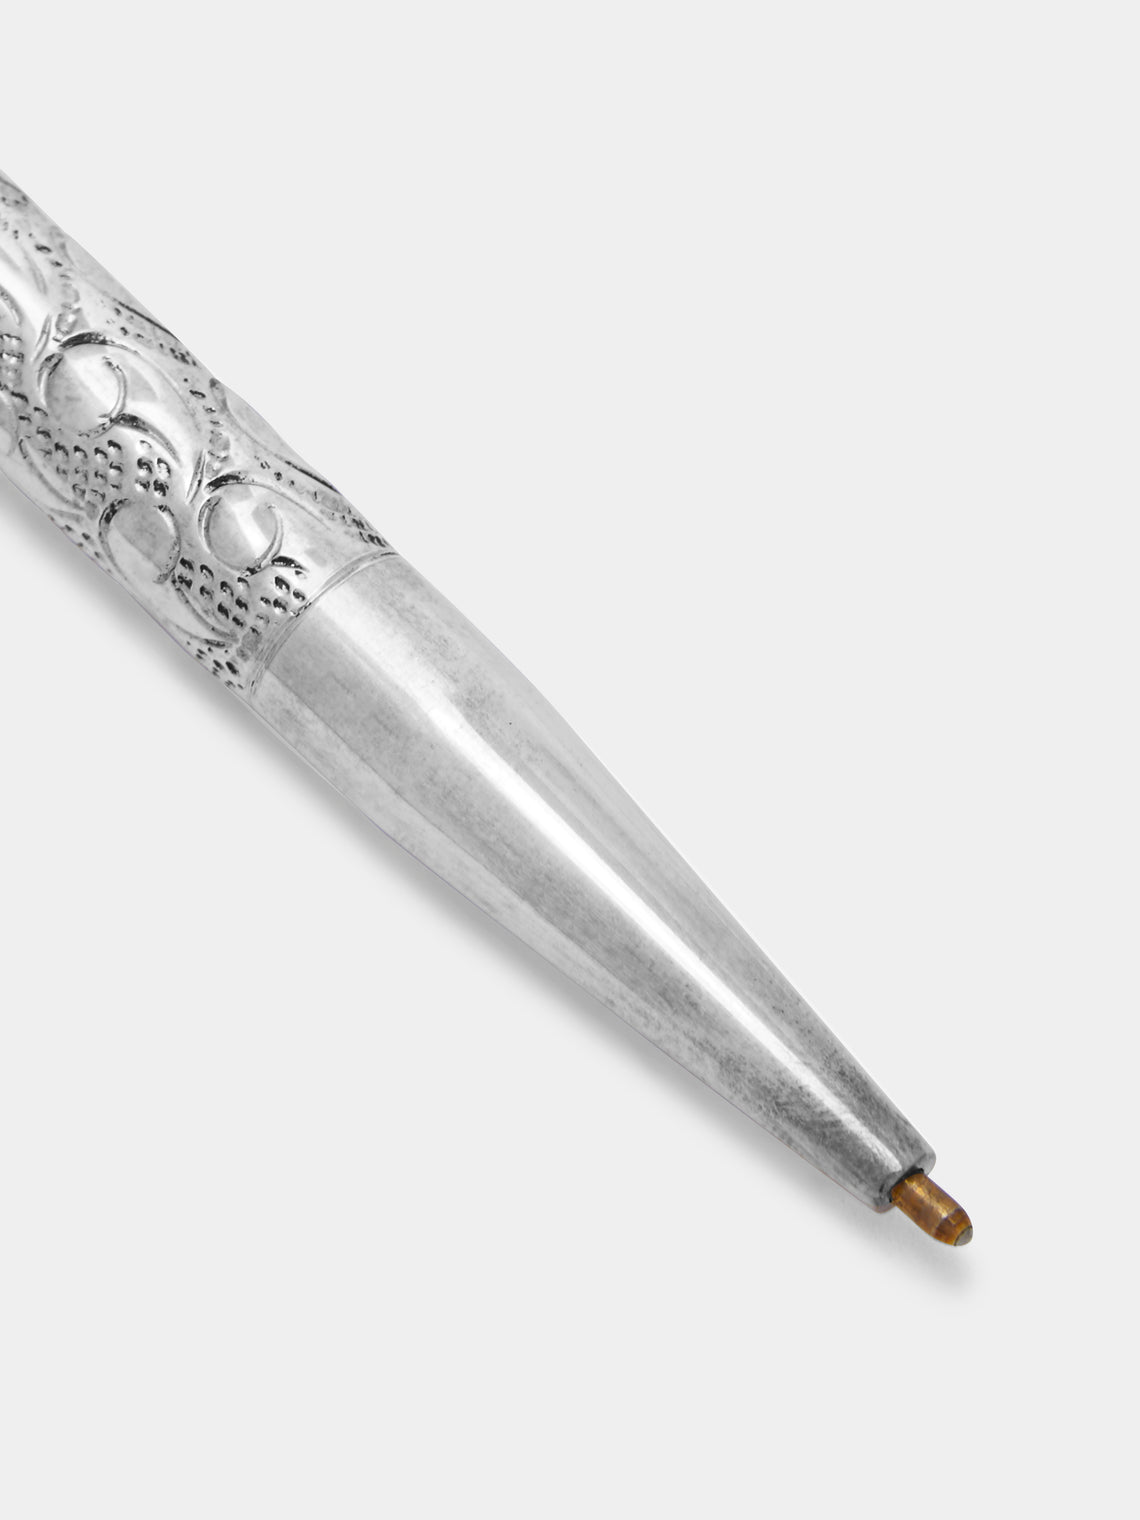 Yard O Led - Perfecta Victorian Sterling Silver Ballpoint Pen - Silver - ABASK